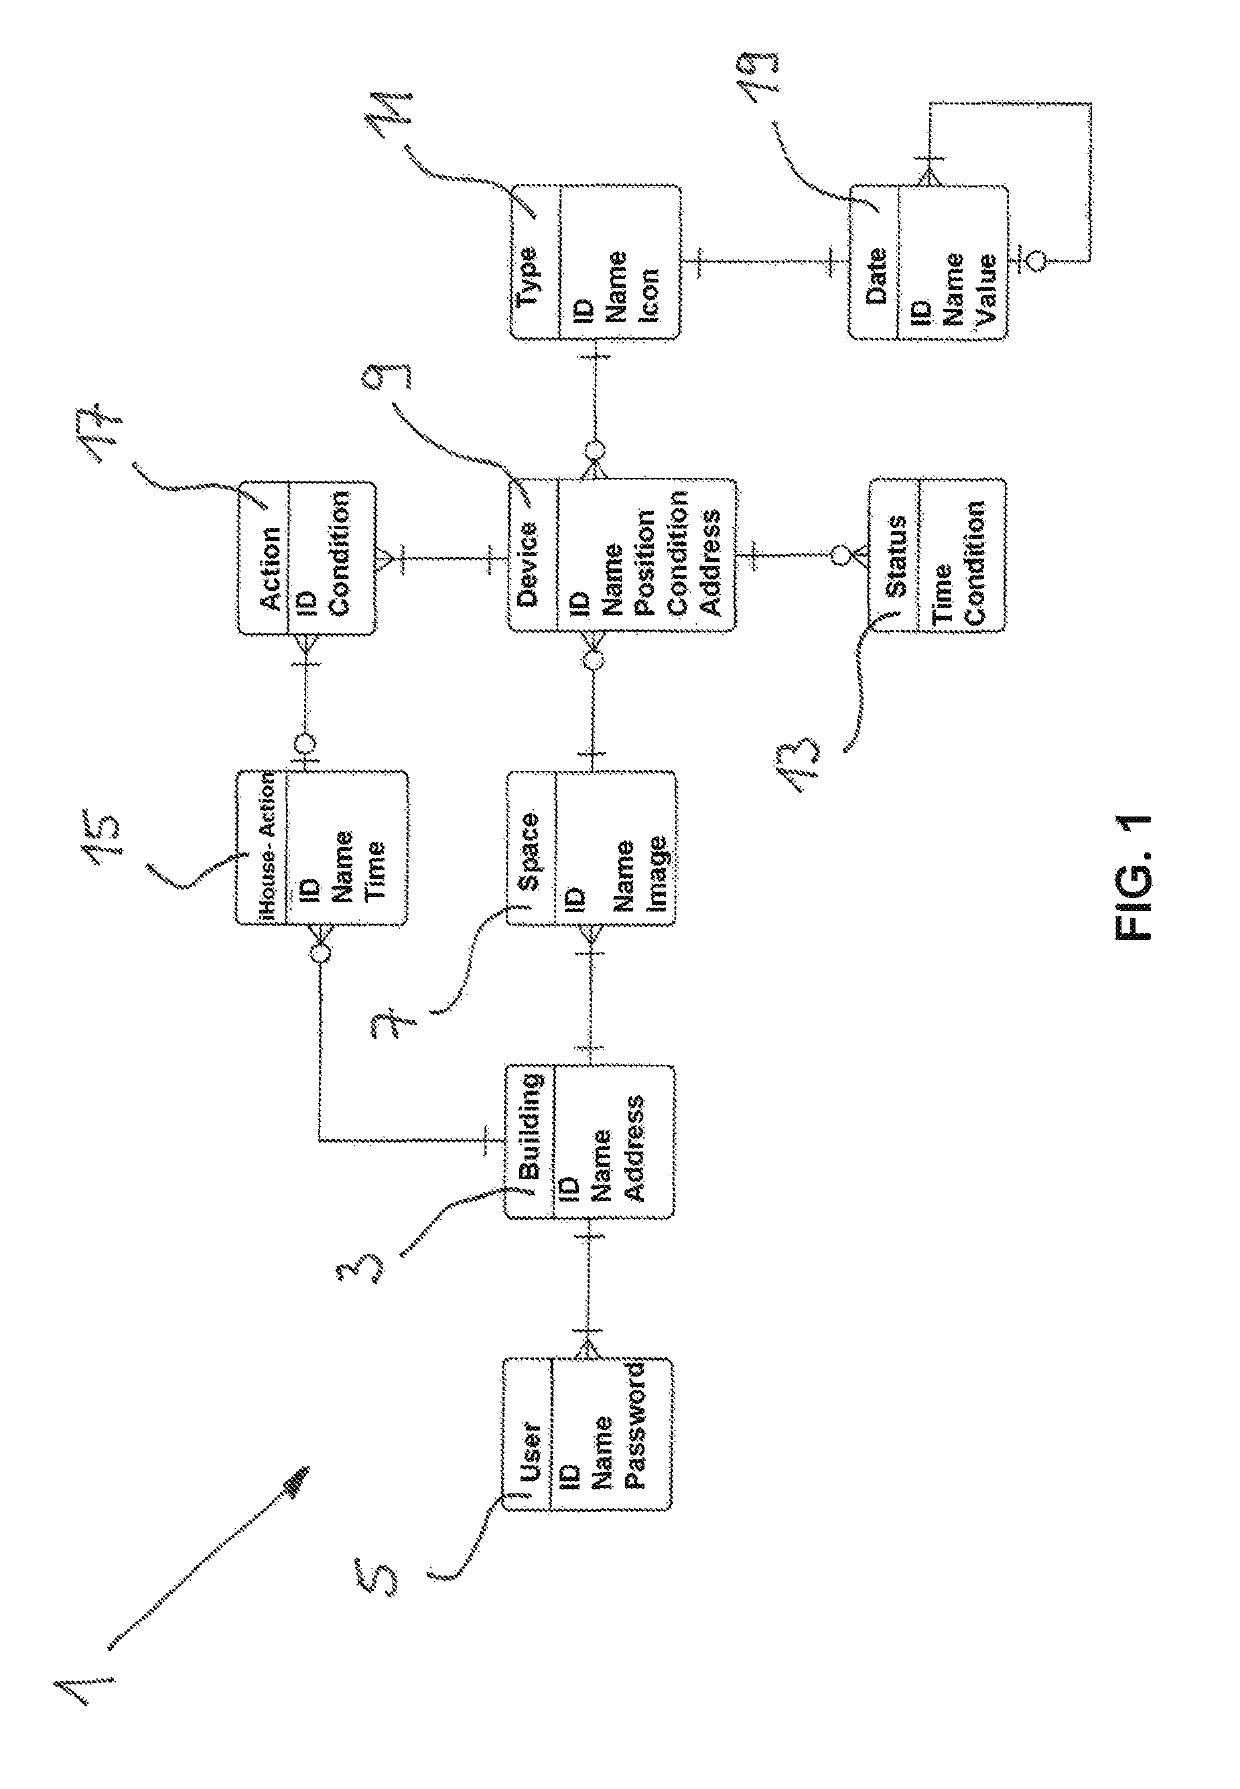 Arrangement and method for controlling electronically controllable devices and systems in public and private buildings